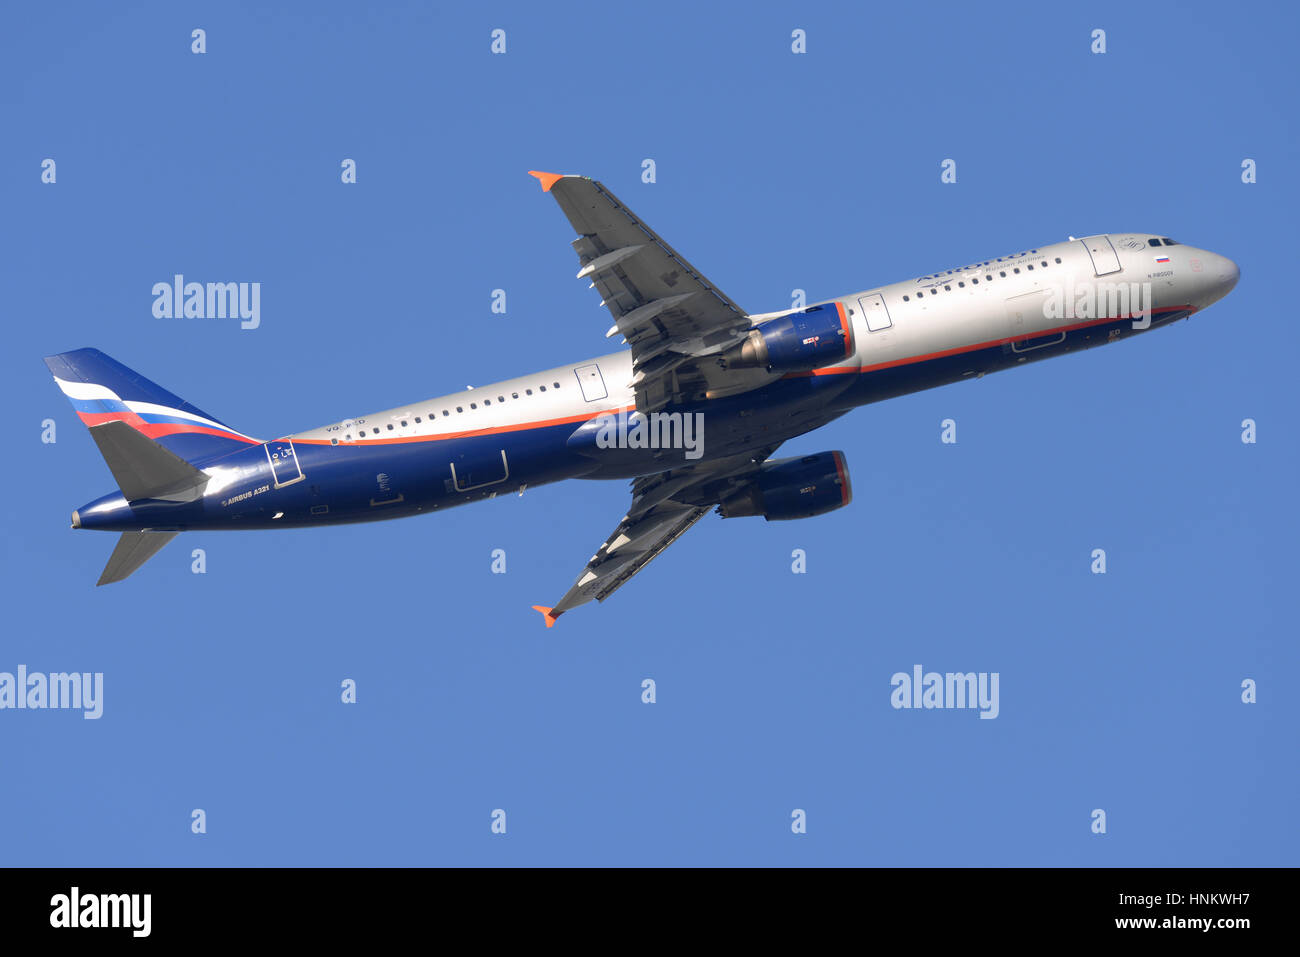 Aeroflot Airbus A321-211 VQ-BED 'N Pirogov' taking off from London Heathrow Airport in blue sky. Russian airline Stock Photo